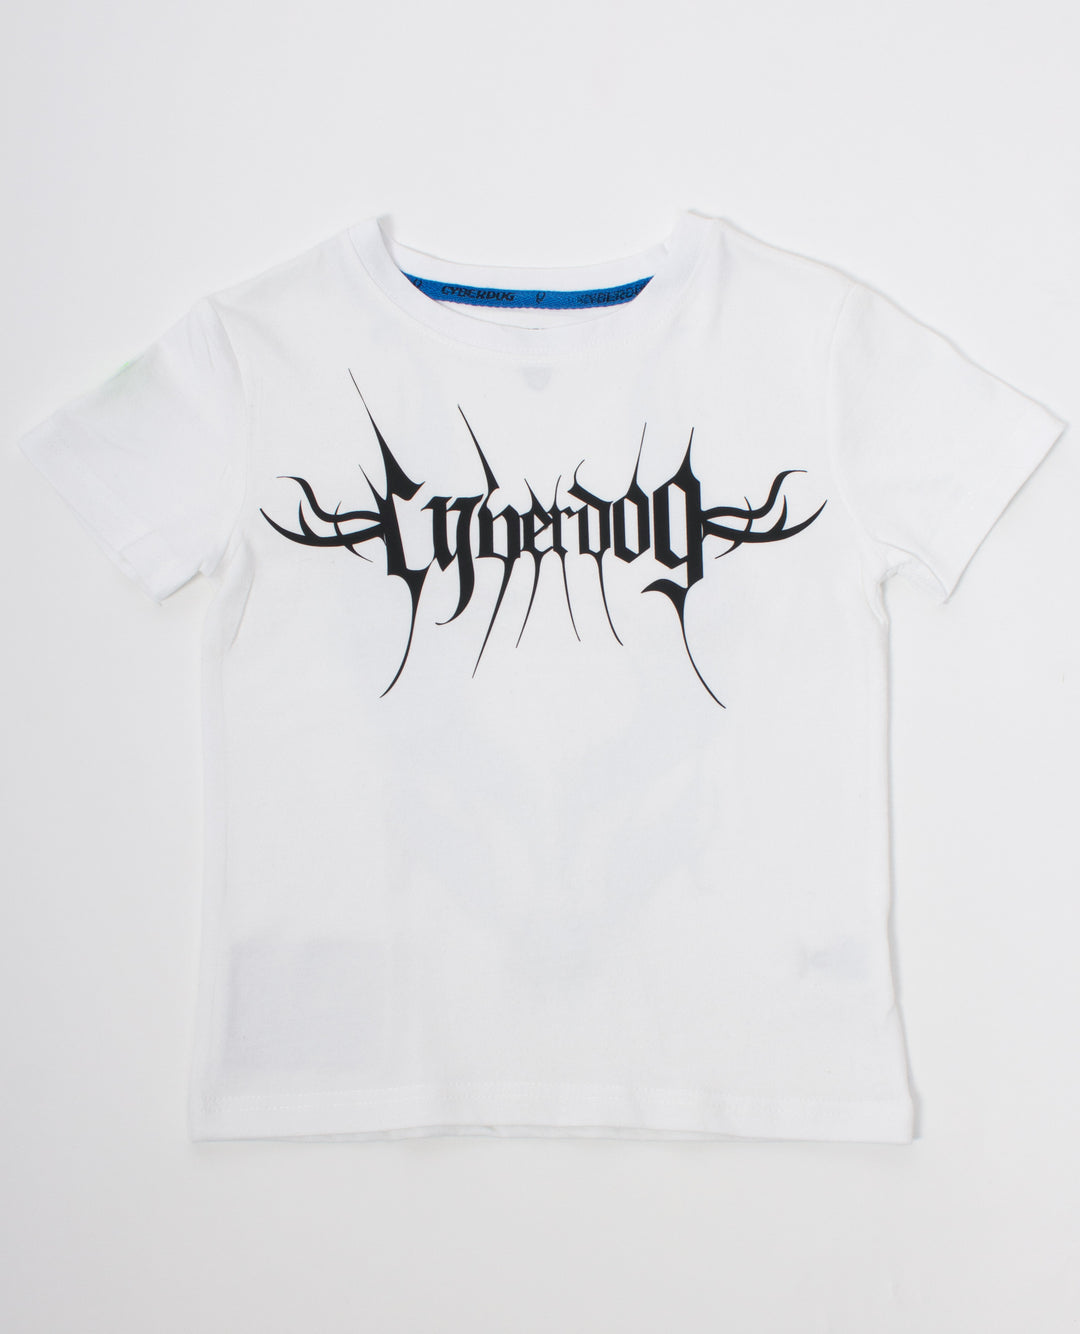 BOYS S/S CYBERLUX WHITE FRONT